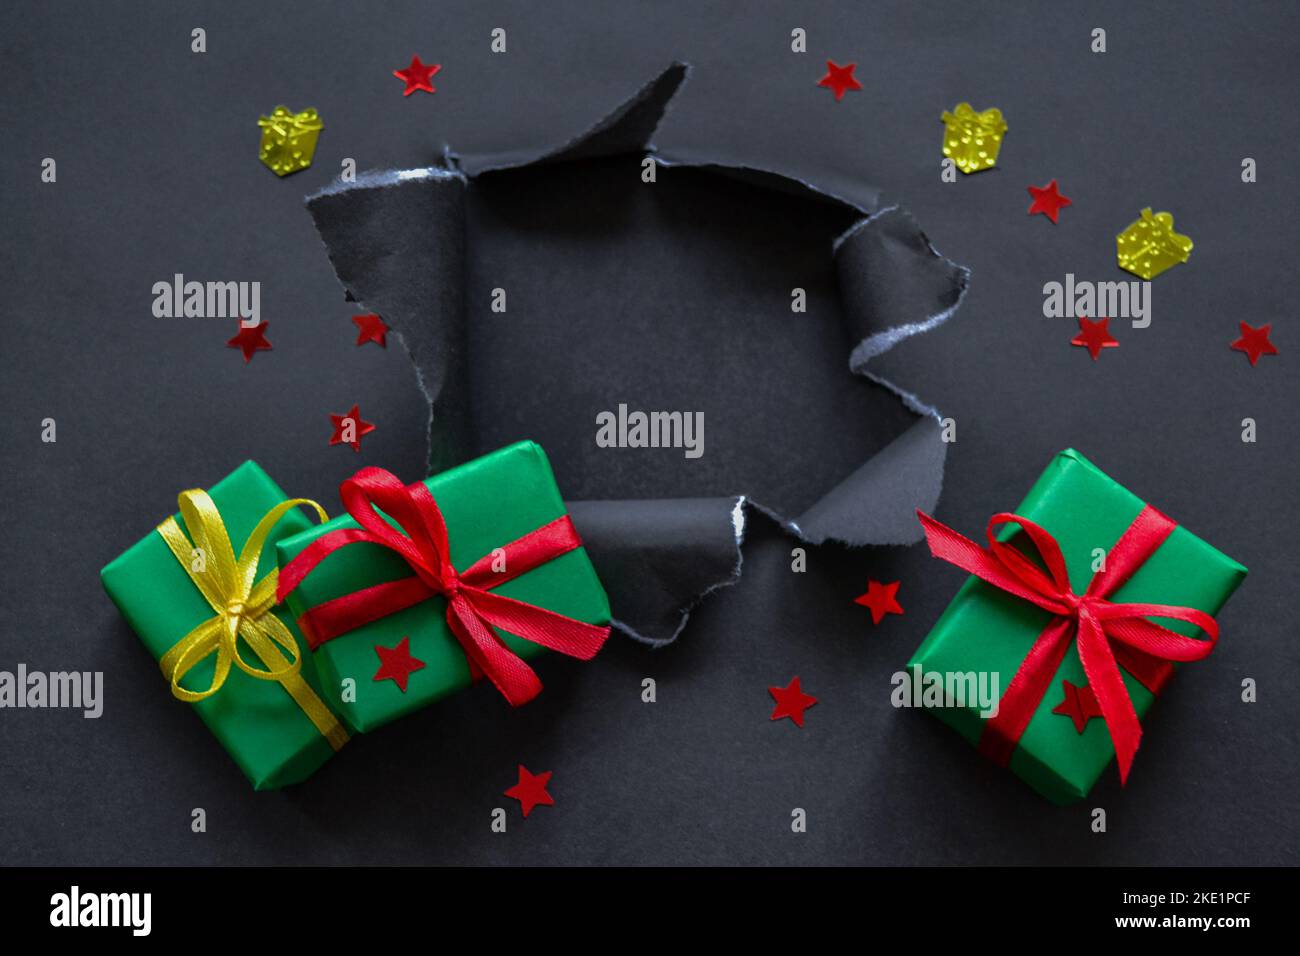 Gifts in green paper with red and yellow ribbons and confetti in the form of red stars and gold presents fall out a torn hole in the black paper. Big Stock Photo